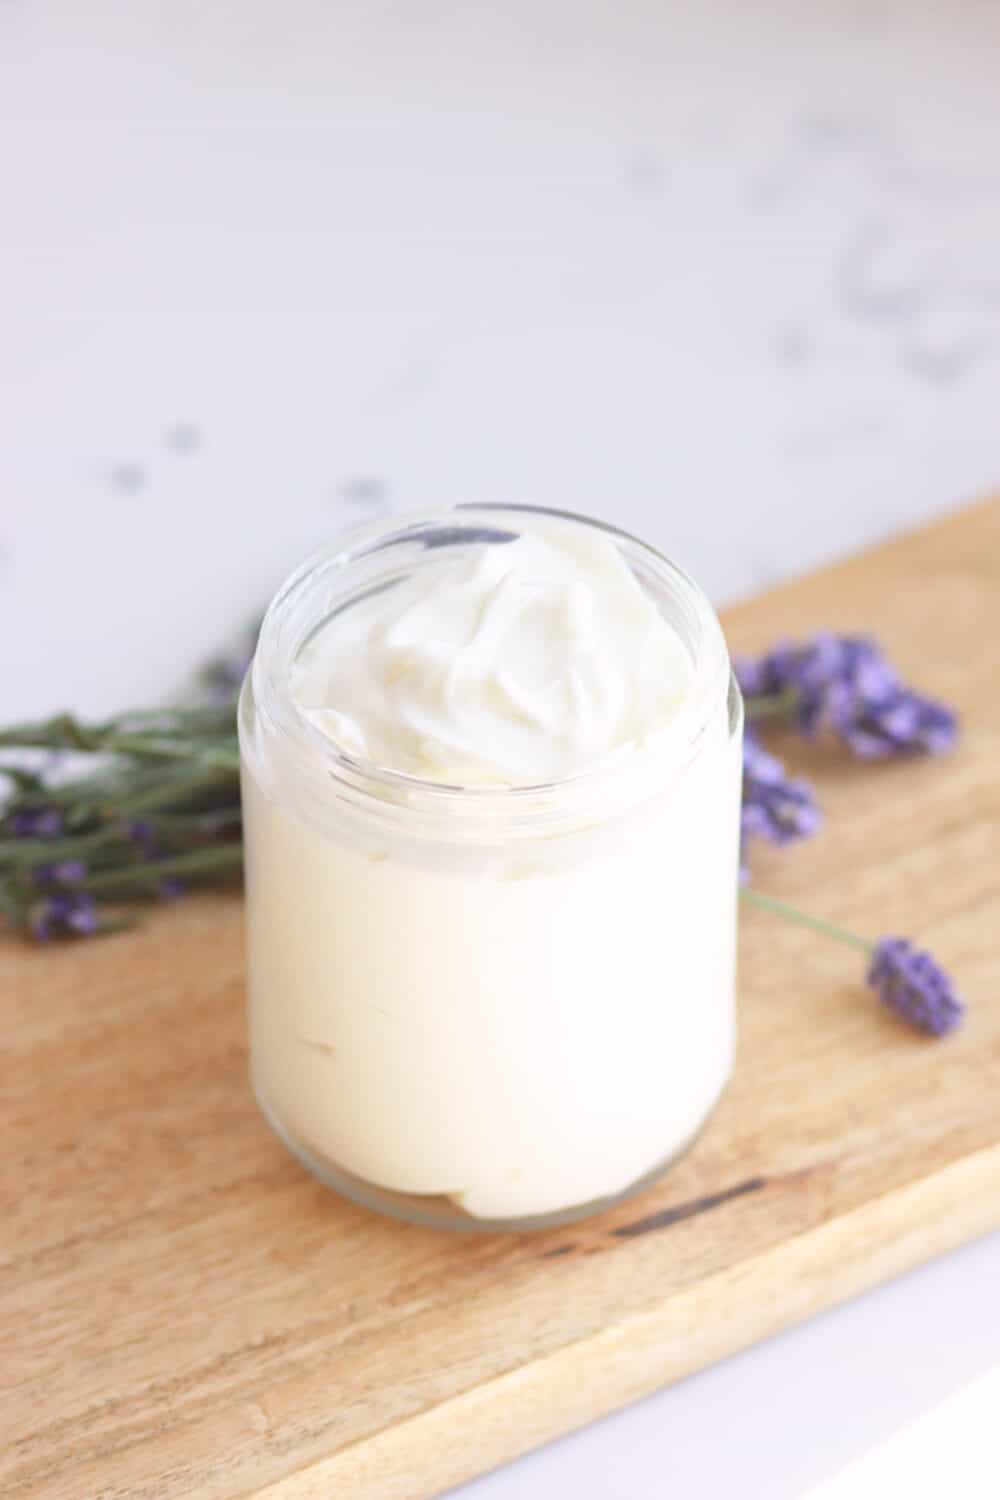 a glass jar of lotion with lavender buds laying around it